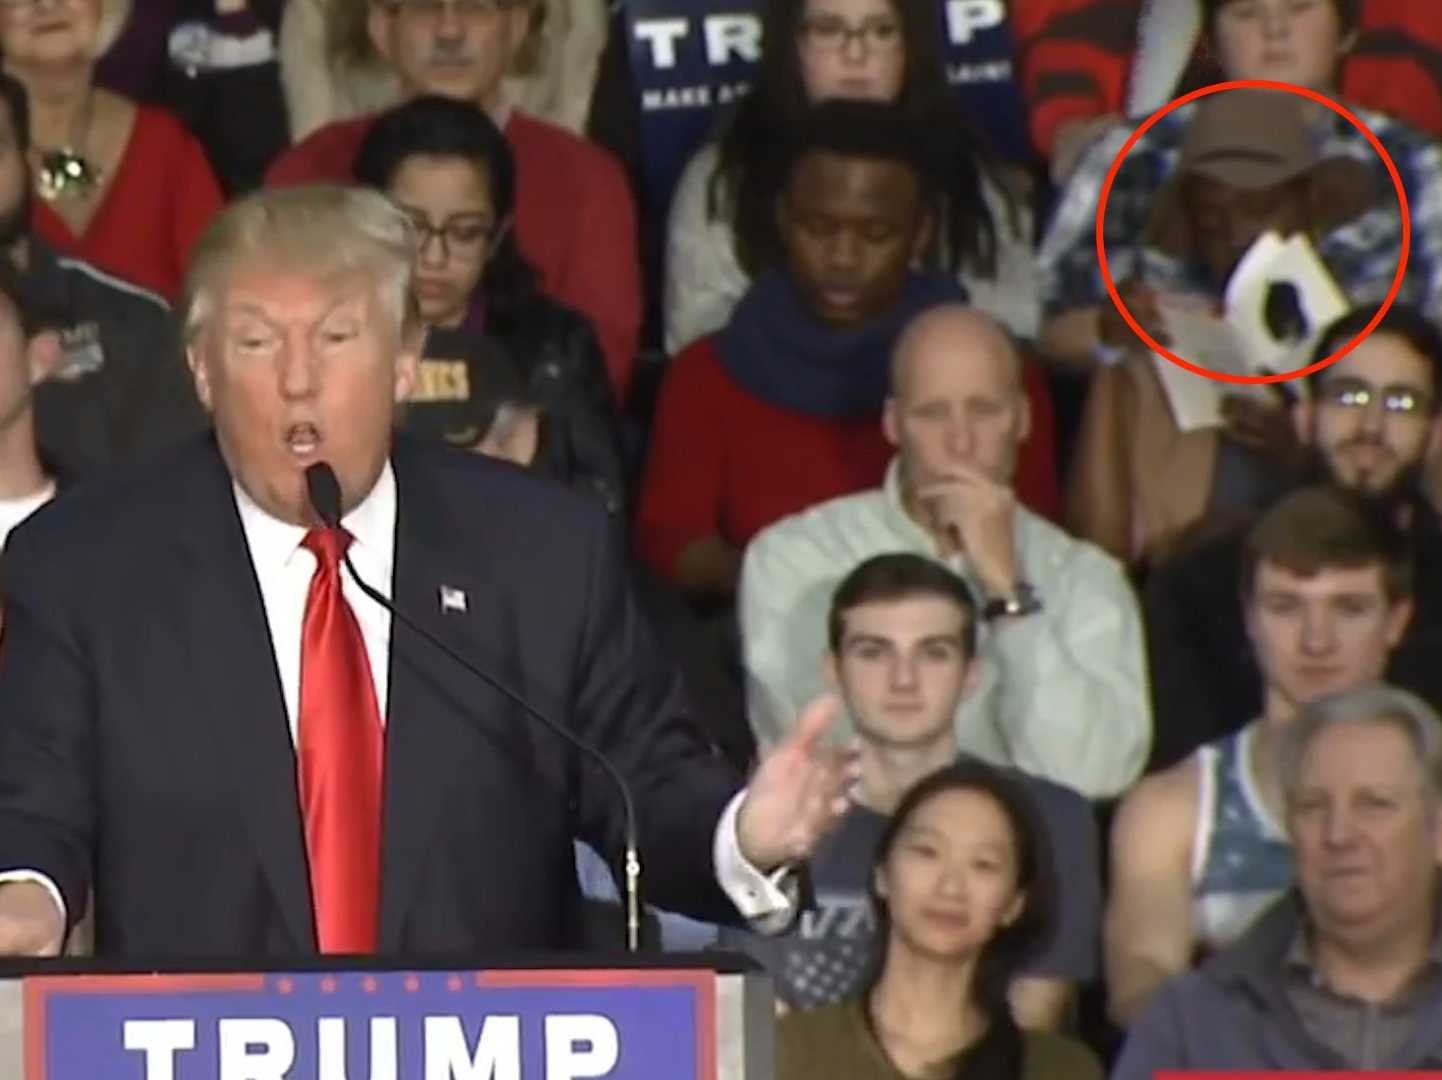 this-woman-got-a-prime-seat-at-a-trump-rally-and-spent-the-whole-time-reading-a-book-about-racism.jpg